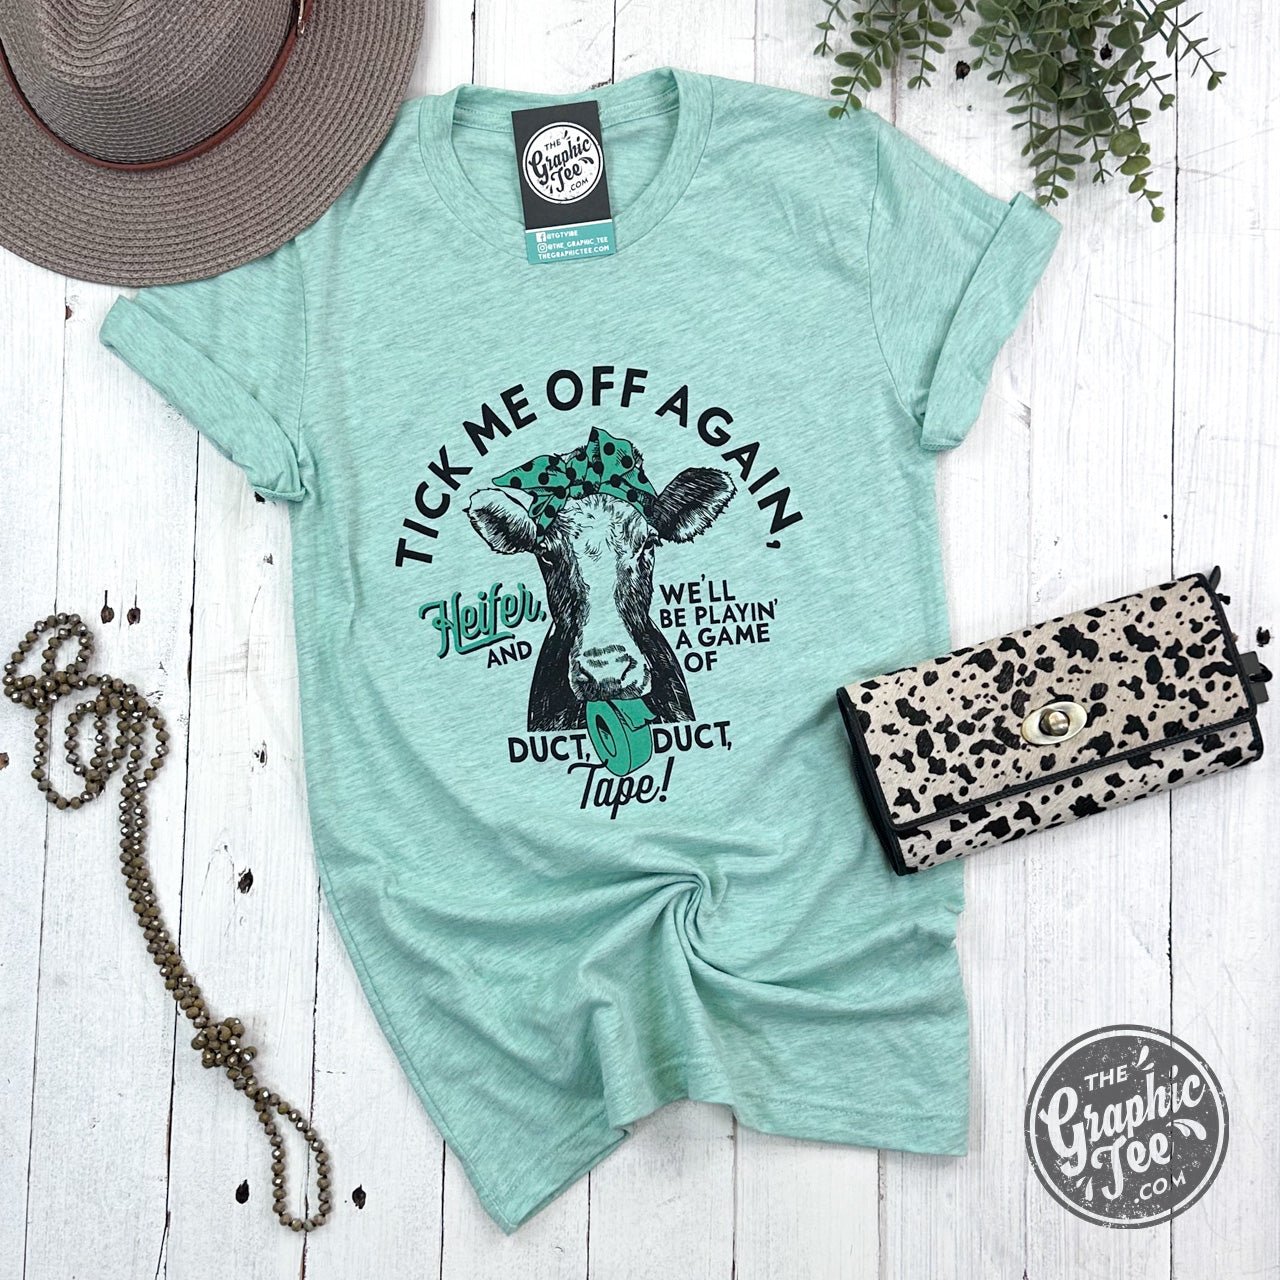 Tick Me Off Again, Heifer Short Sleeve Heather Prism Mint Tee - The Graphic Tee